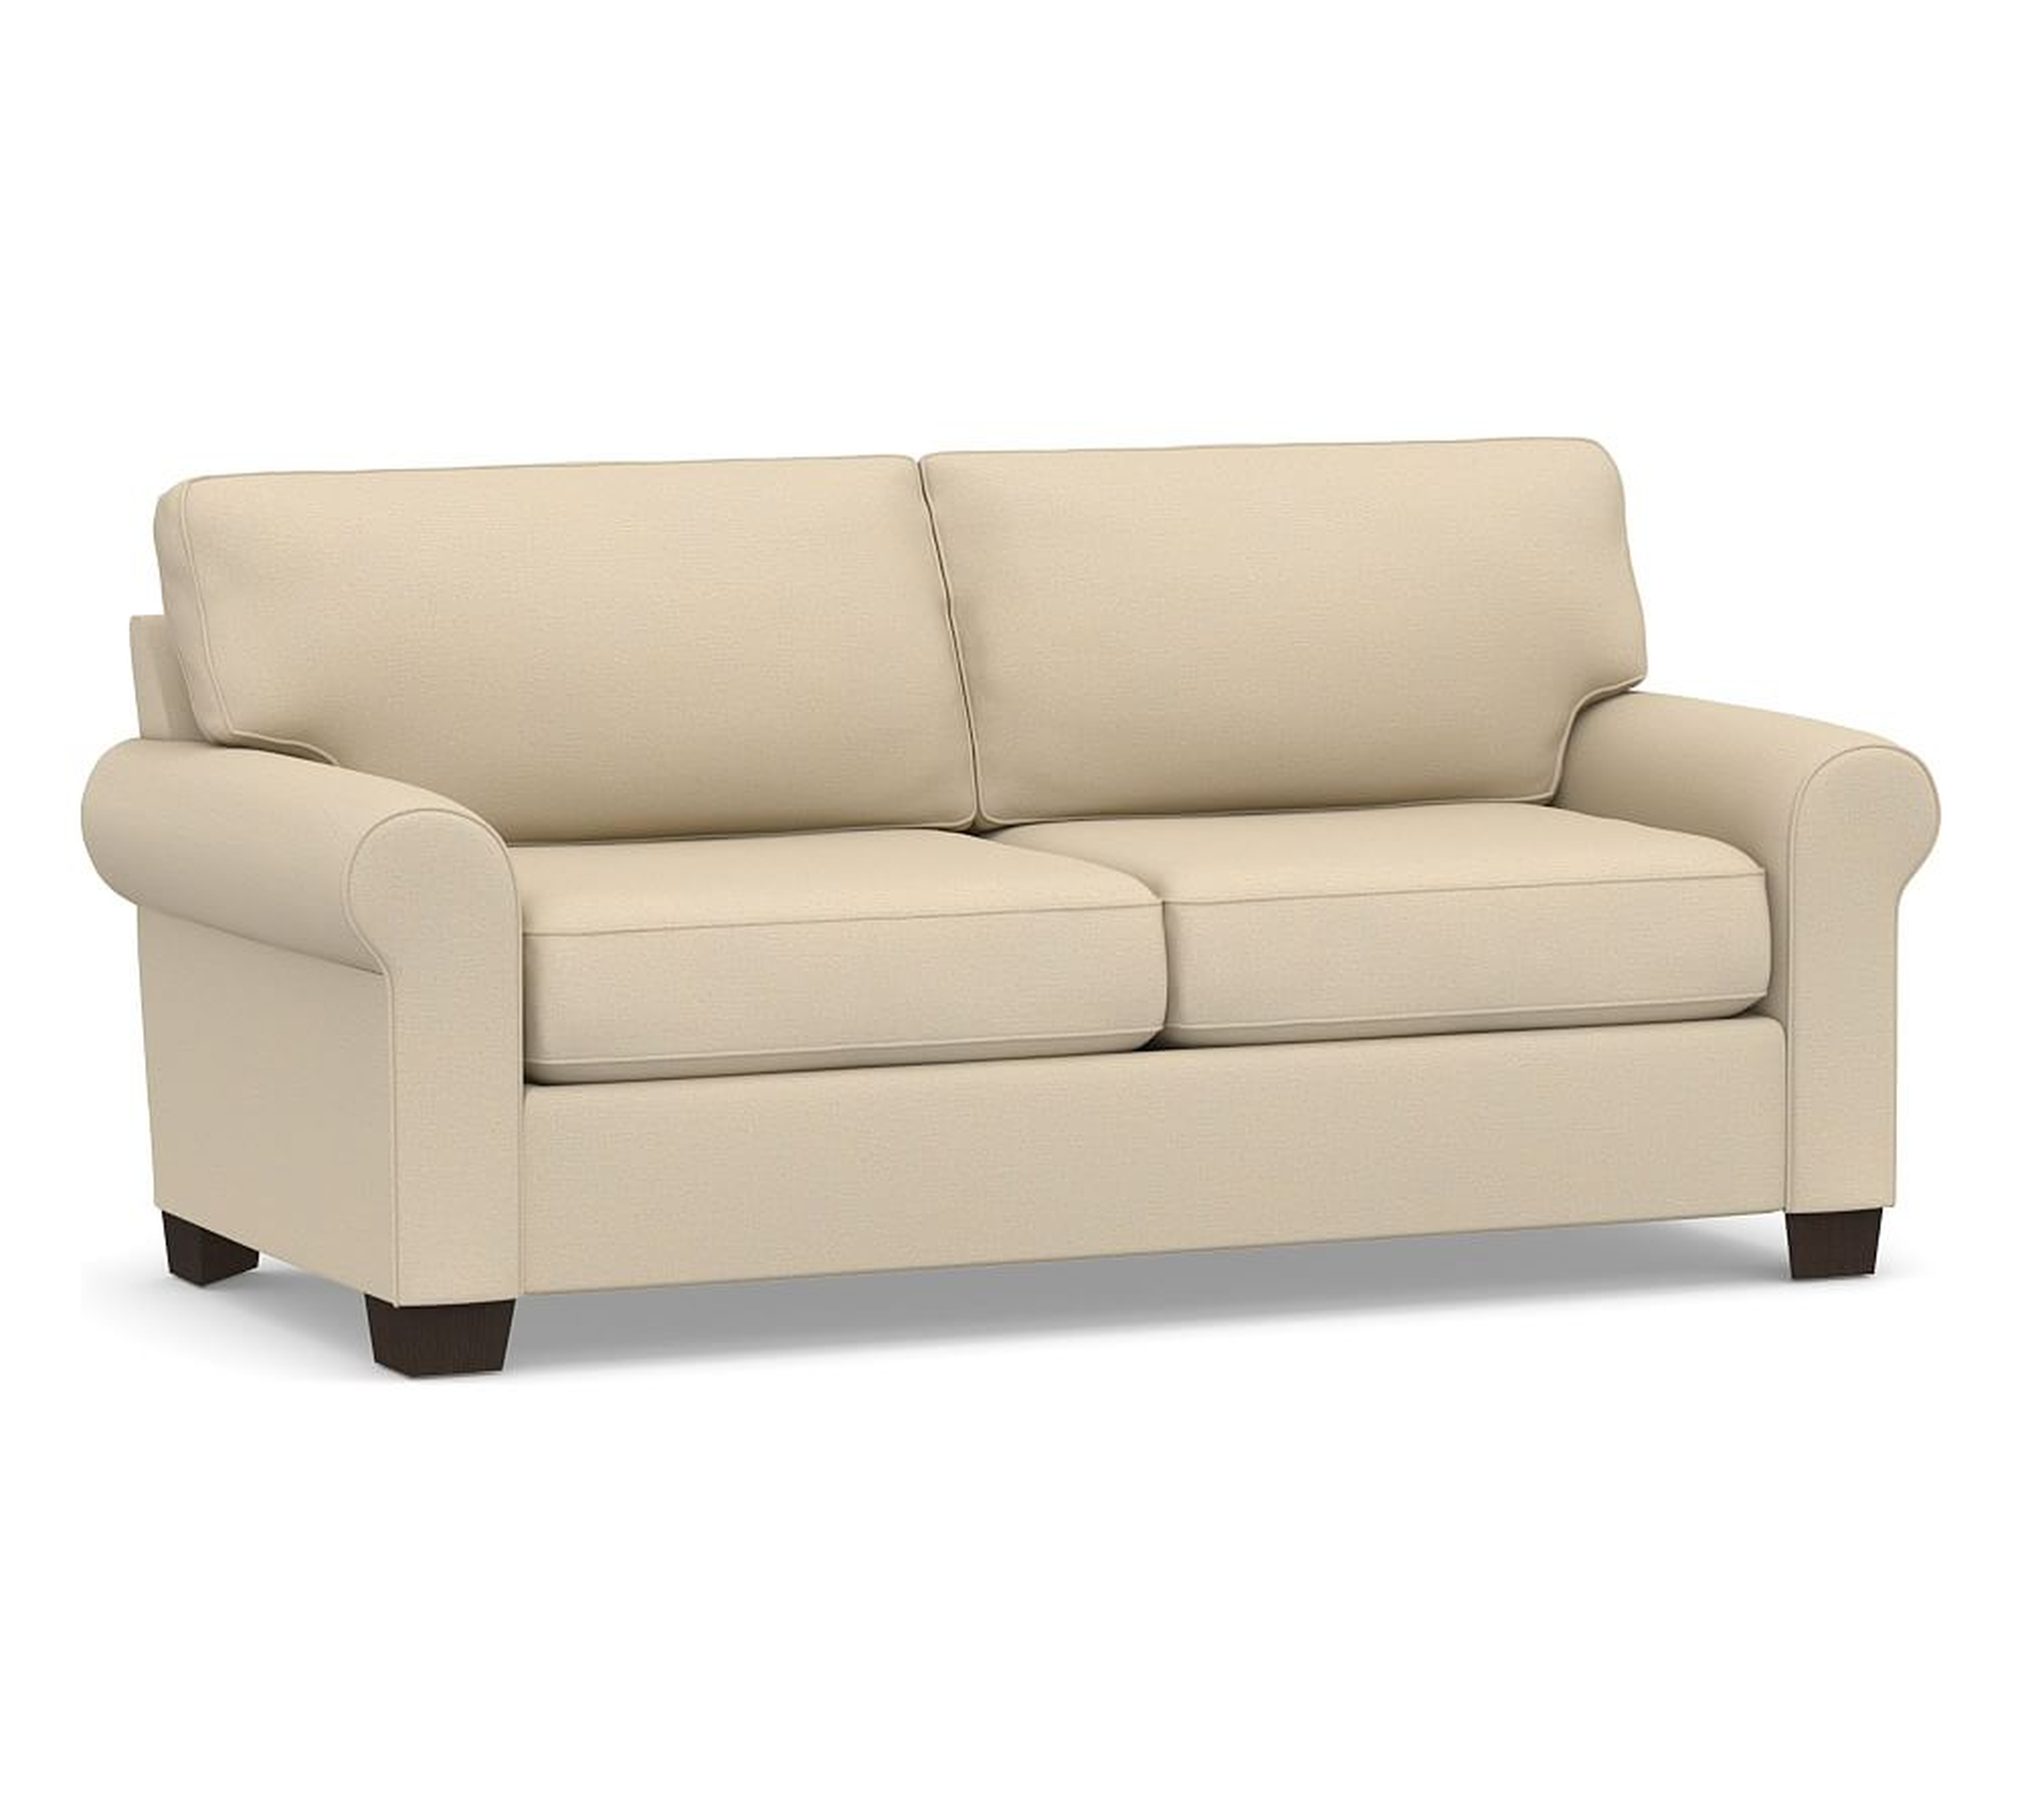 Buchanan Roll Arm Upholstered Loveseat 79", Polyester Wrapped Cushions, Park Weave Oatmeal - Pottery Barn